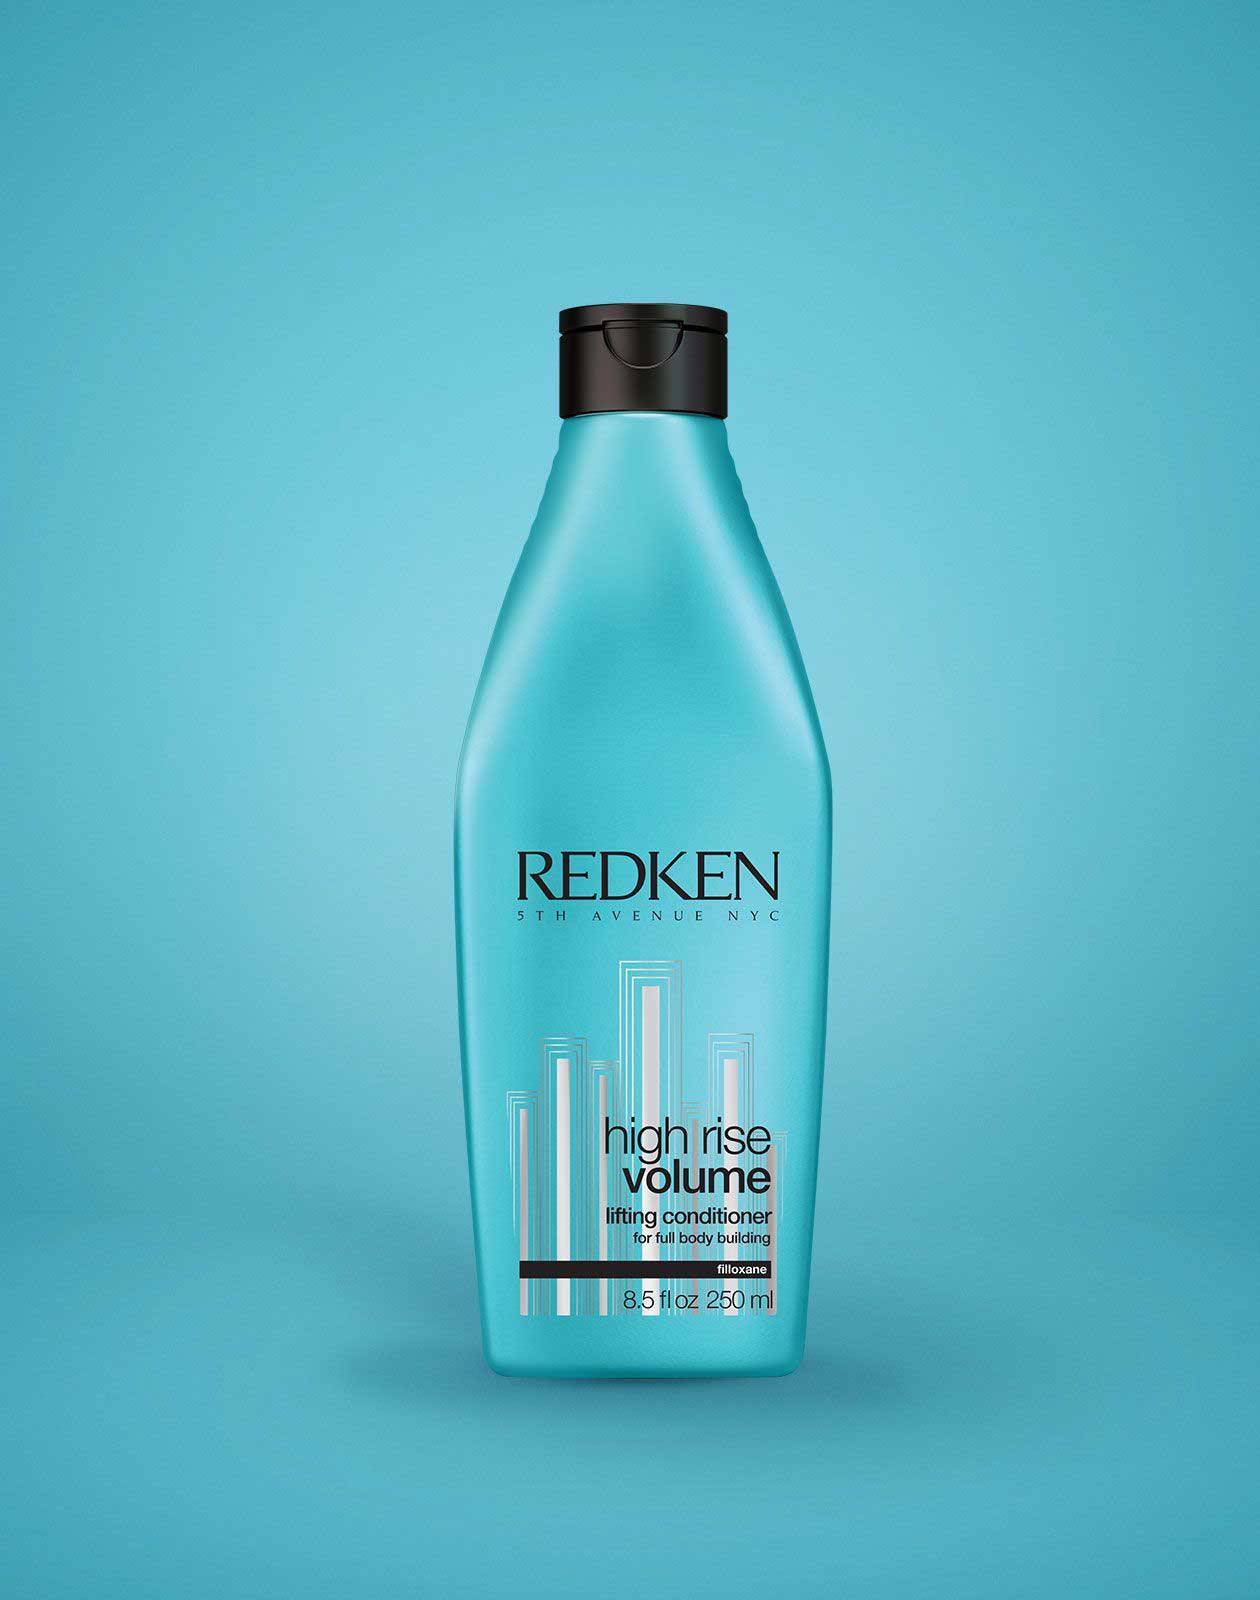 REDKEN_High rise volume lifting conditioner_Cosmetic World